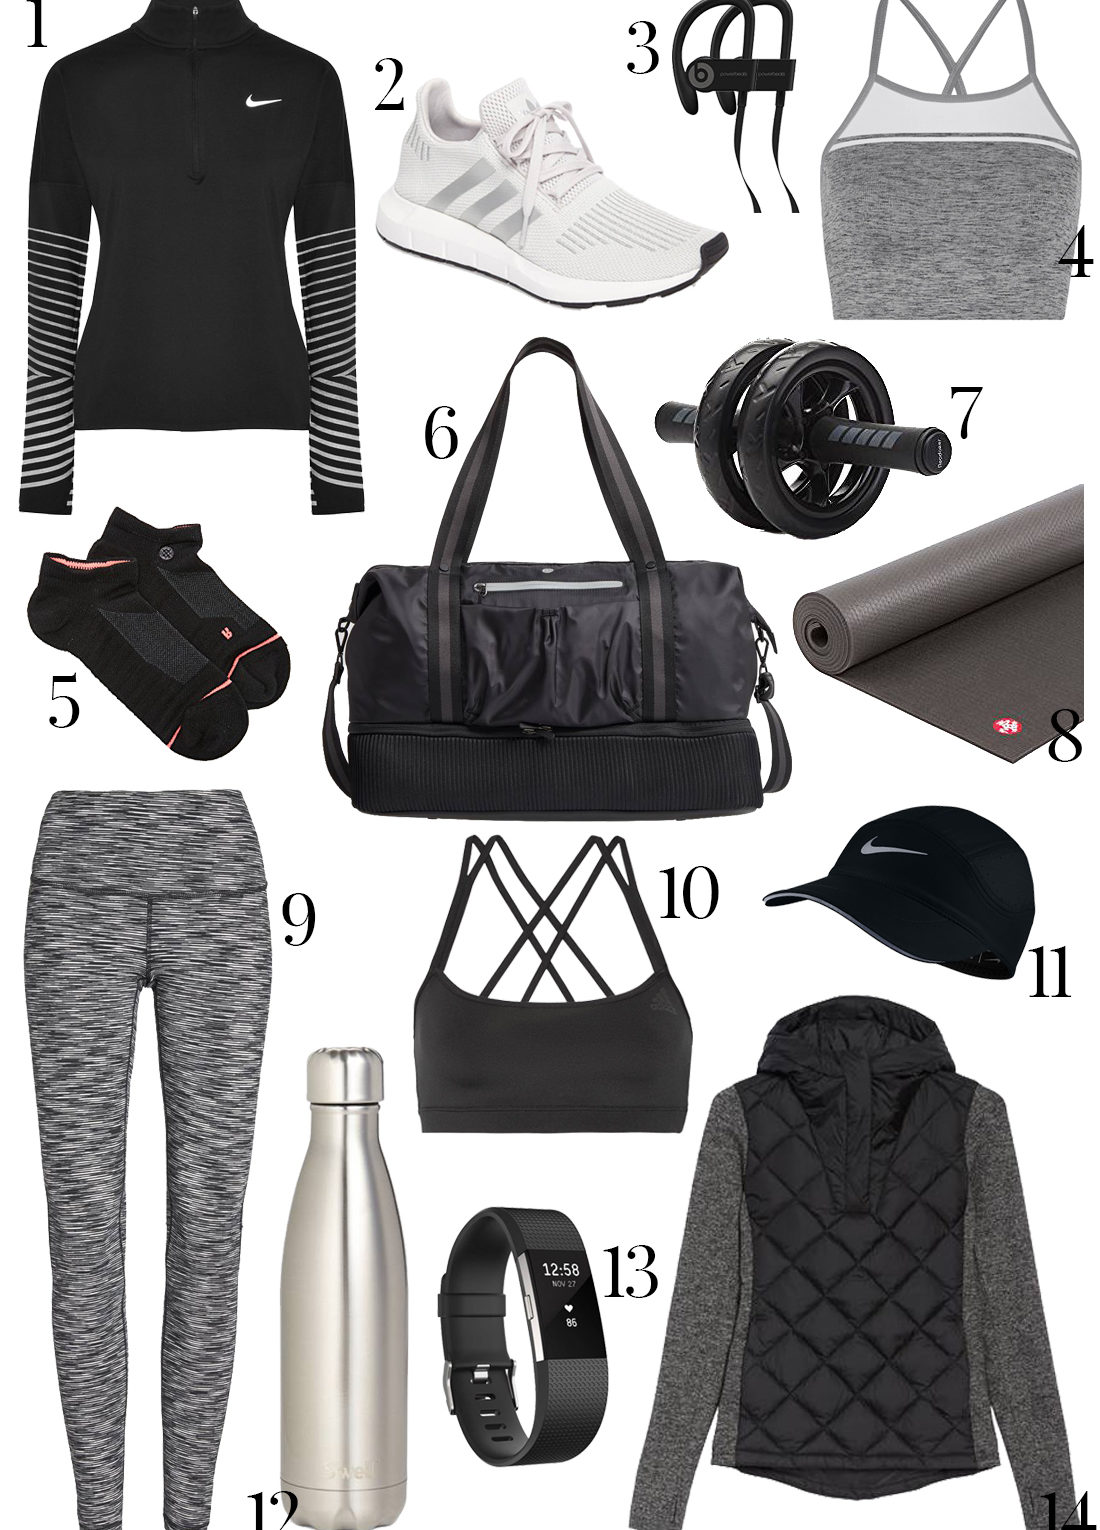 Holiday Gifts Fitness Gifts Activewear gifts